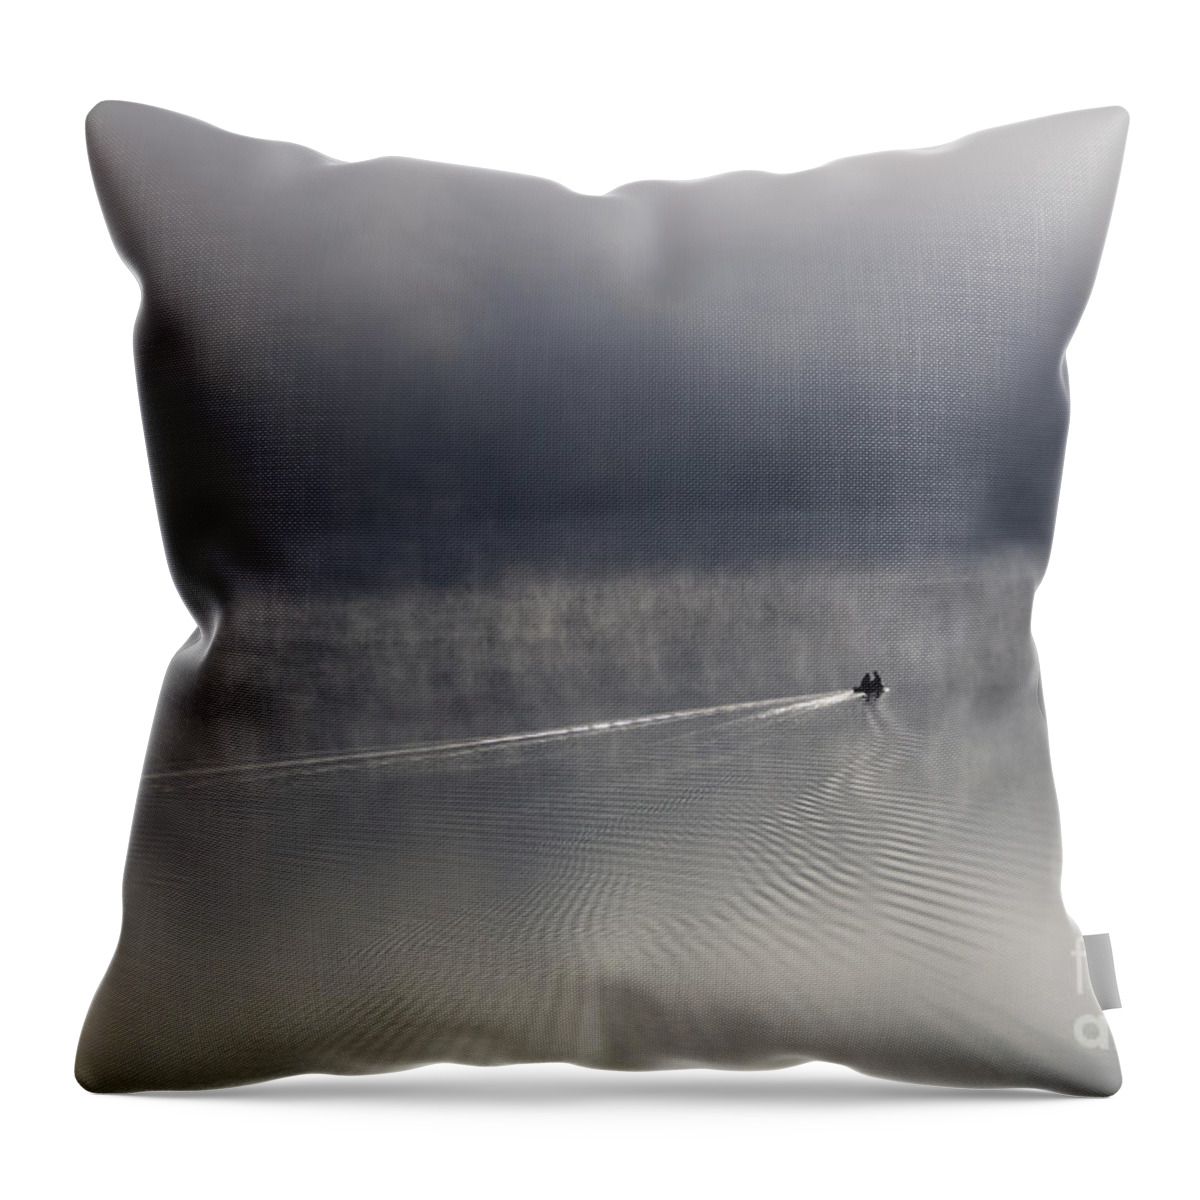 Atmospheric Throw Pillow featuring the photograph Boat On A Misty Lake #3 by Falk Herrmann